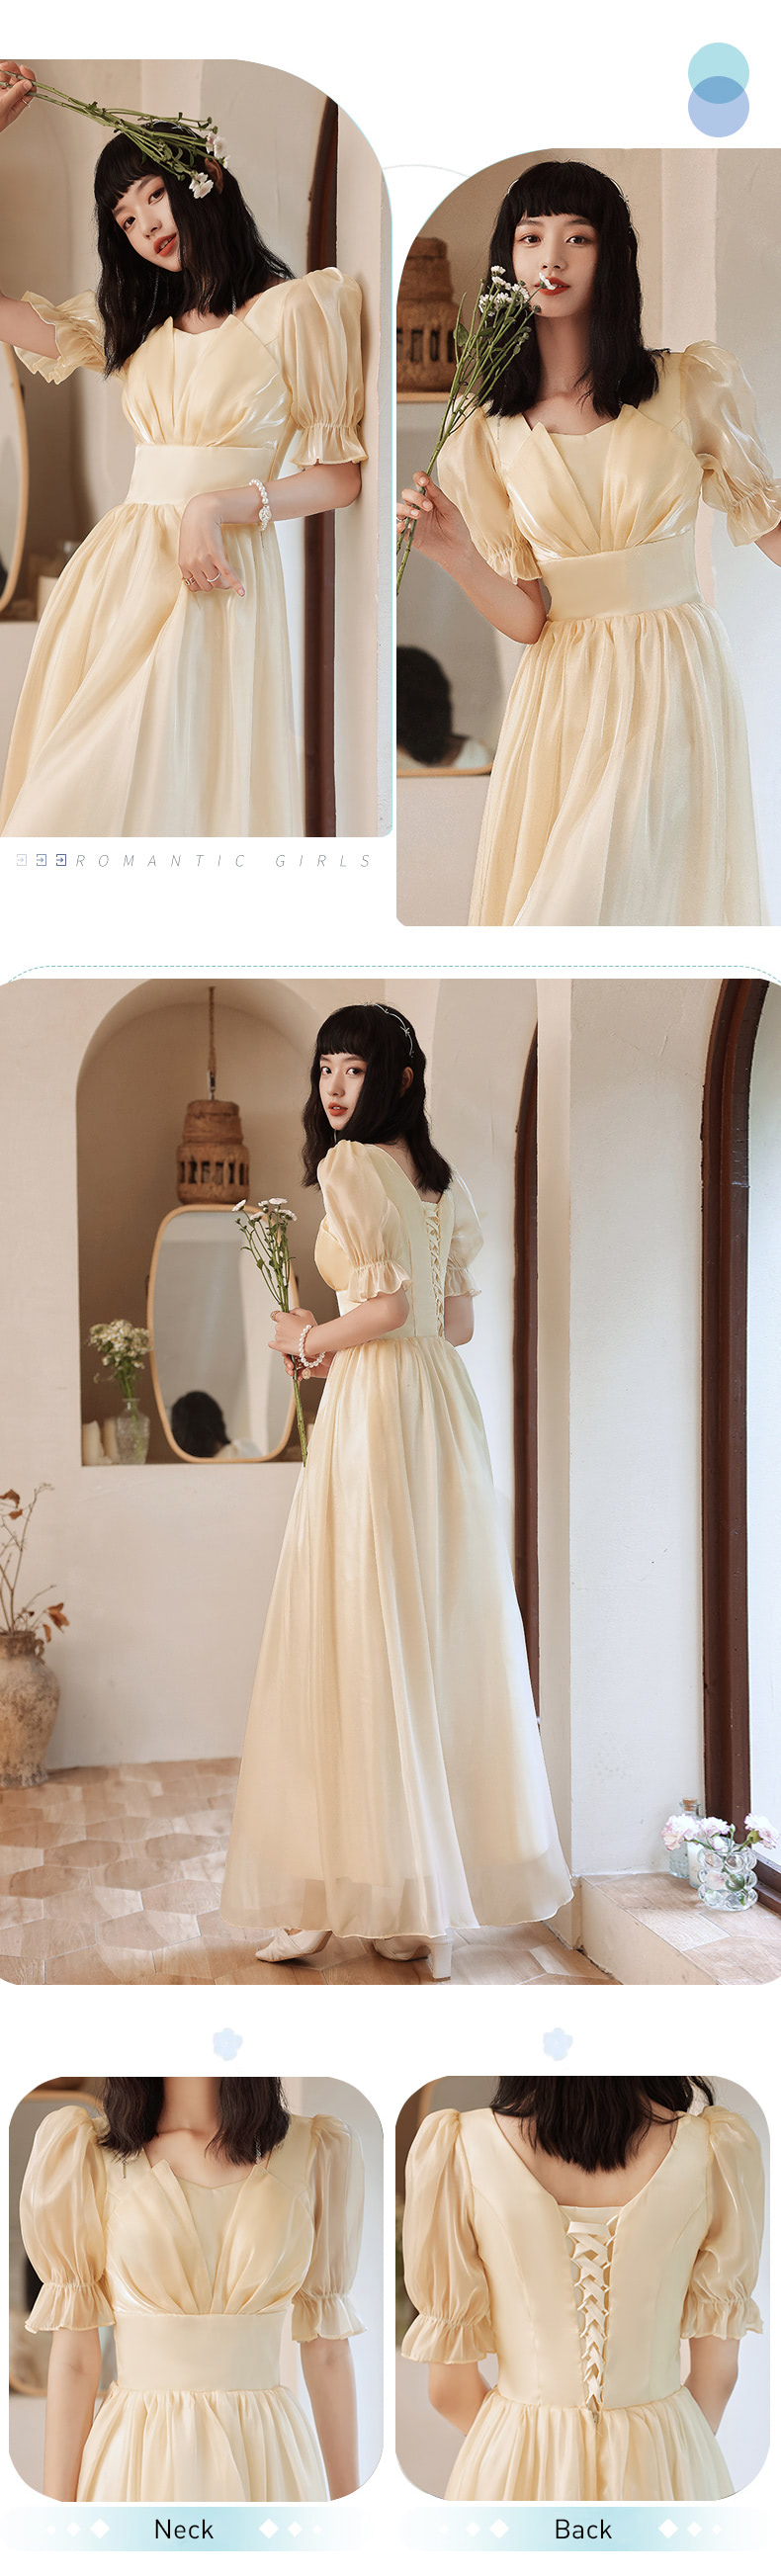 Simple-Champagne-Bridal-Party-Formal-Gown-Bridesmaid-Dress19.jpg